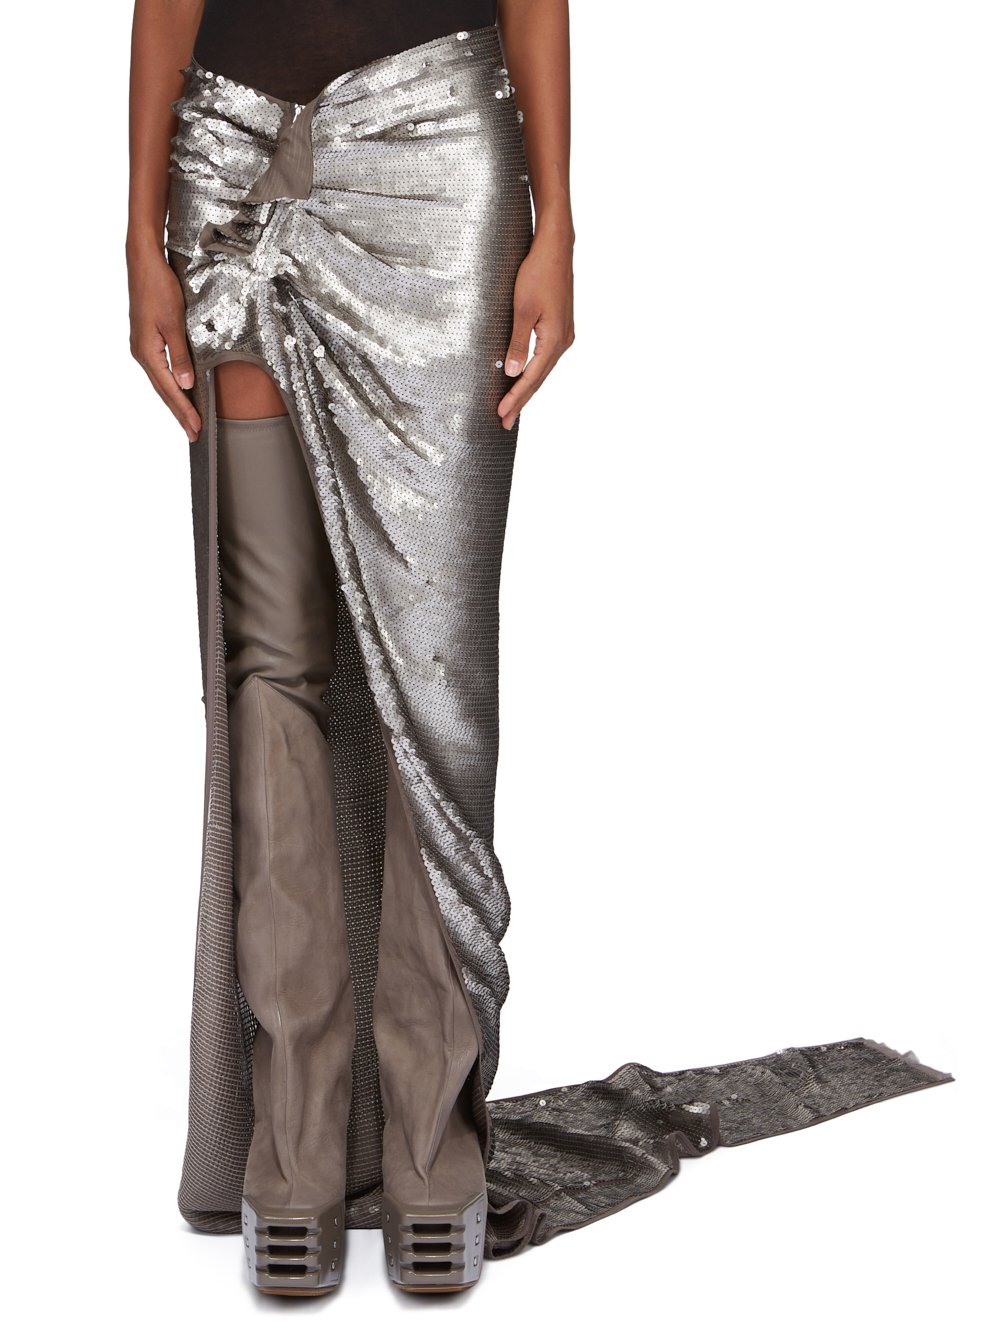 RICK OWENS FW23 LUXOR RUNWAY EDFU SKIRT RUNWAY LENGTH IN DUST AND PEARL SEQUIN EMBROIDERED SILK CHIFFON